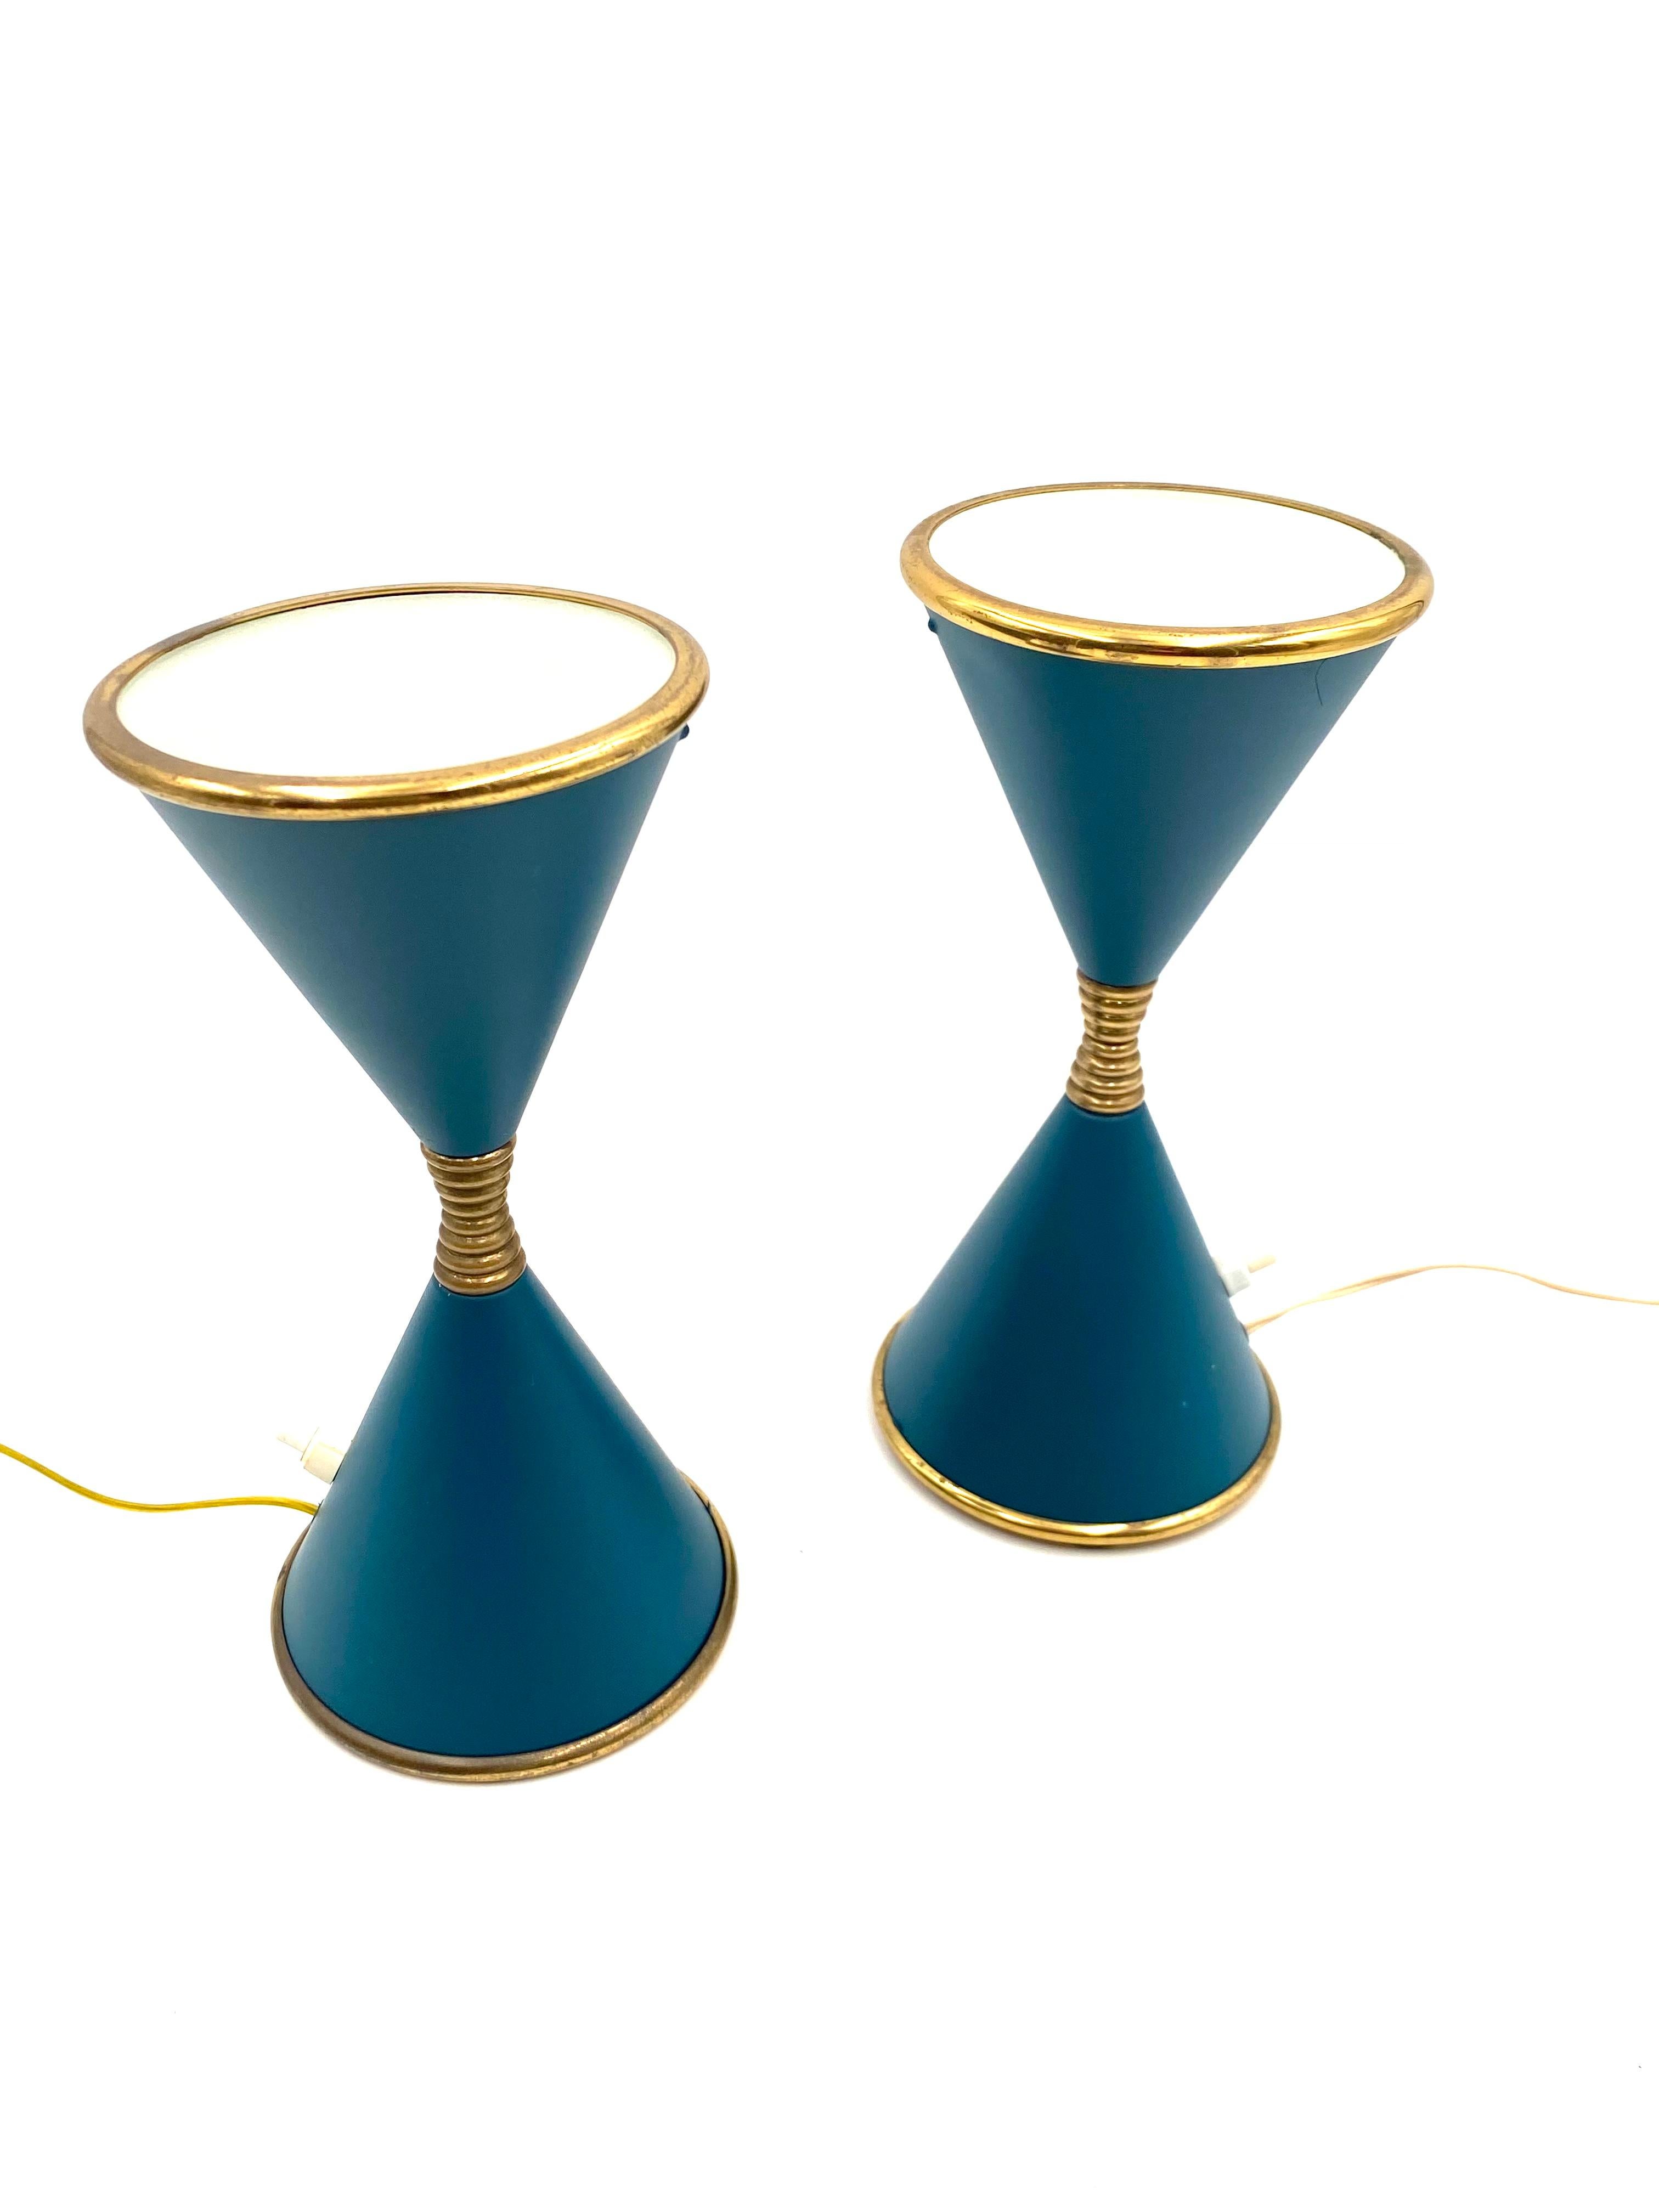 Angelo Lelii, Set of 2 'Clessidra' Table Lamps, Arredoluce, Milan Italy, 1960 For Sale 4